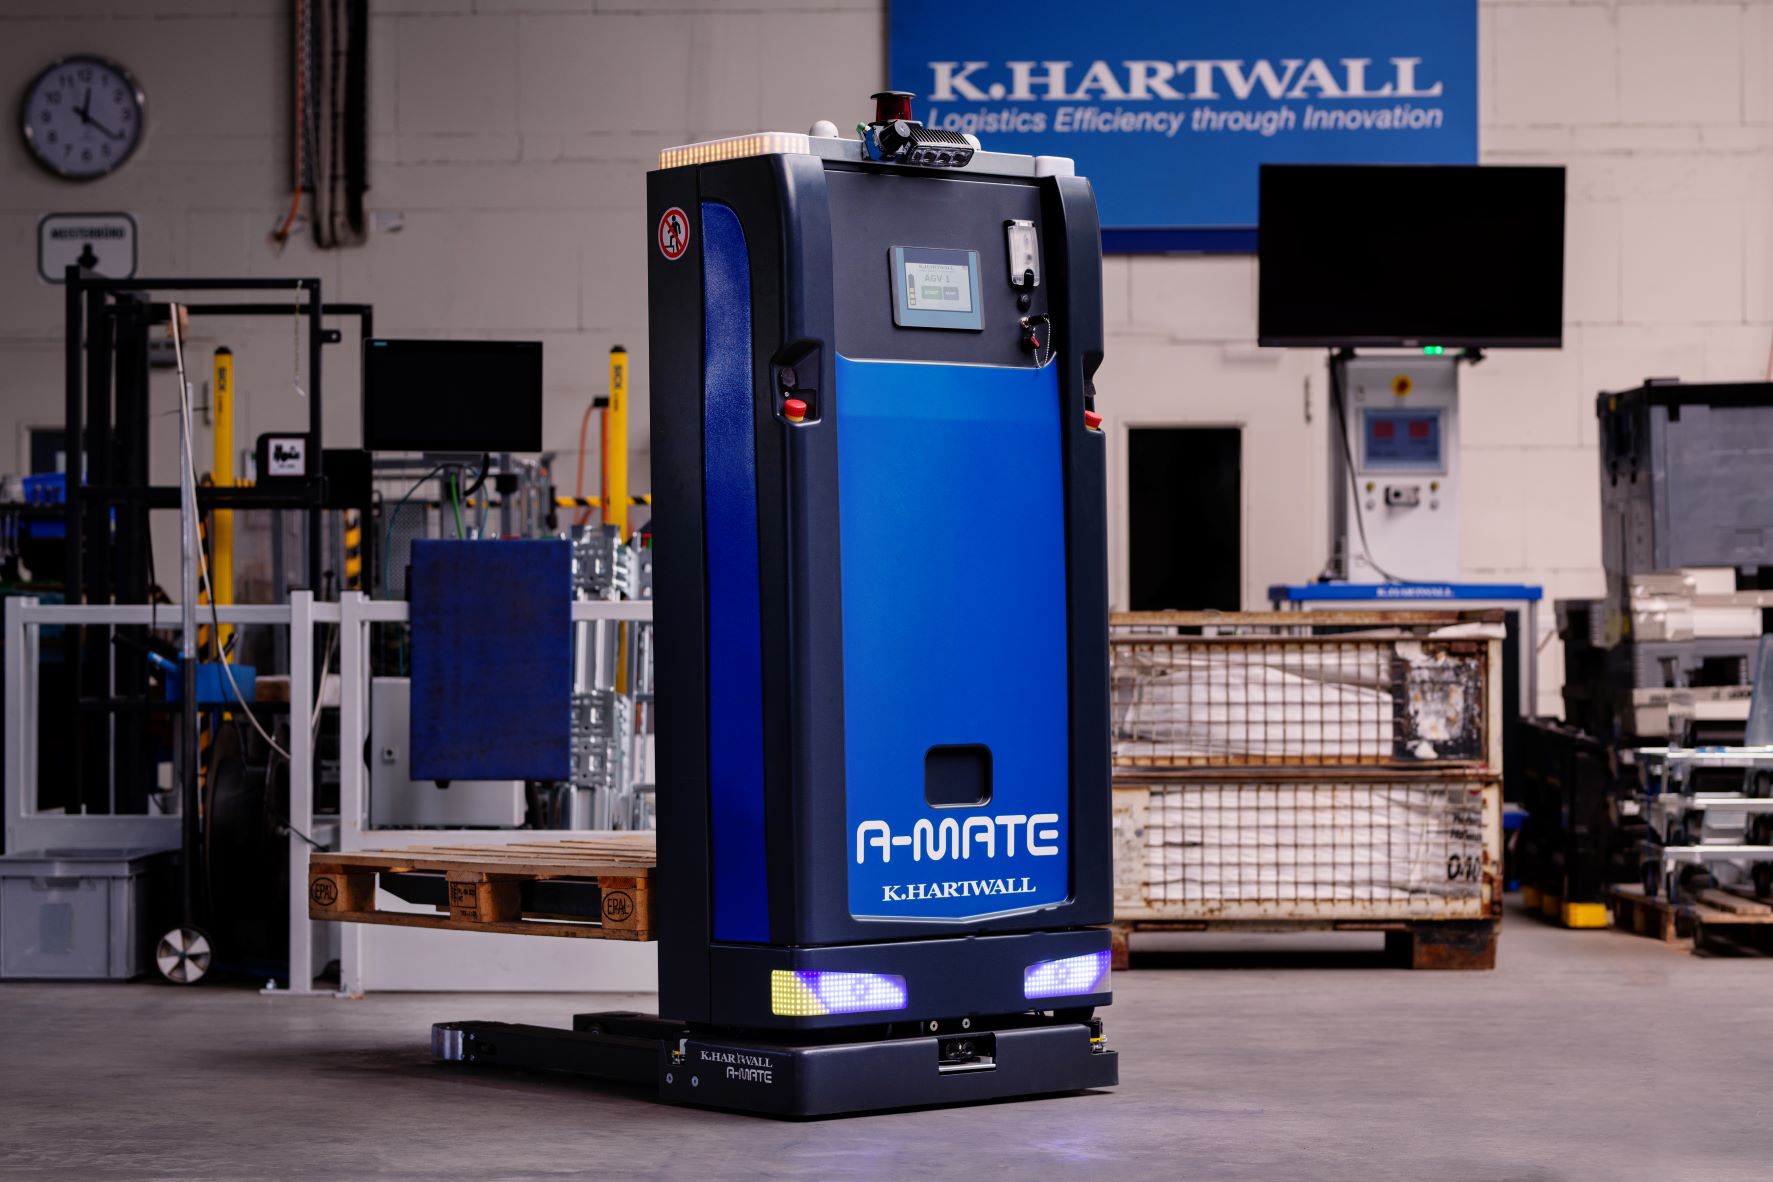 A-MATE FreeLift supports efficient pallet handling even in tight spaces with omnidrive